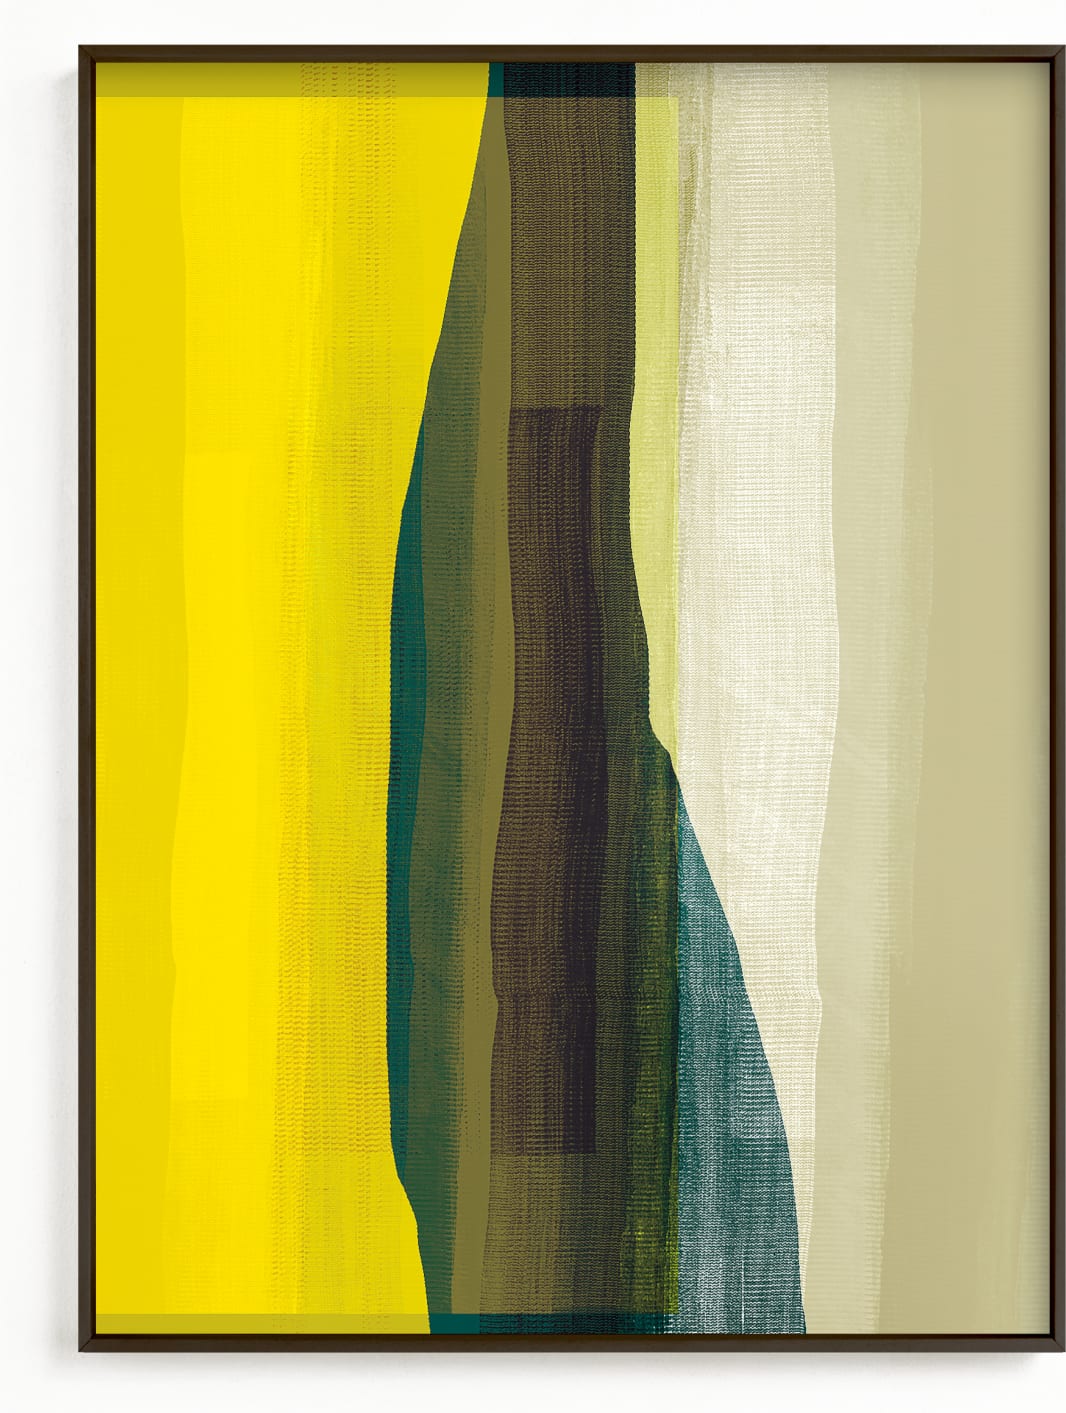 This is a yellow art by Debra Pruskowski called Green Bottle Abstract.